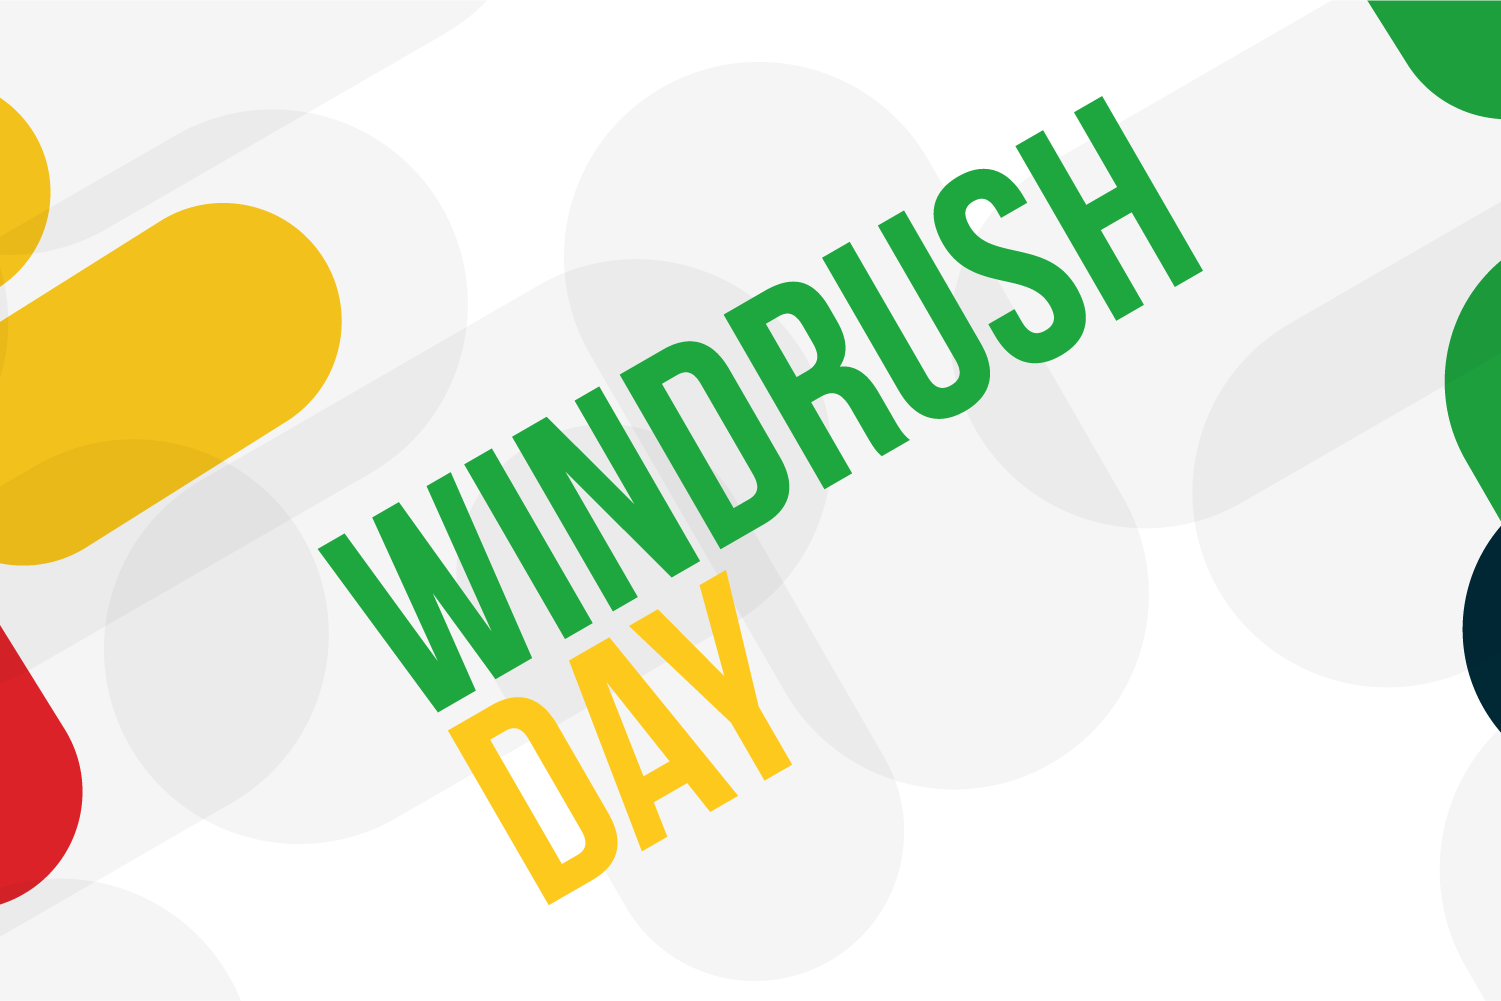 Windrush Day 2020 launches with £500,000 for communities - GOV.UK